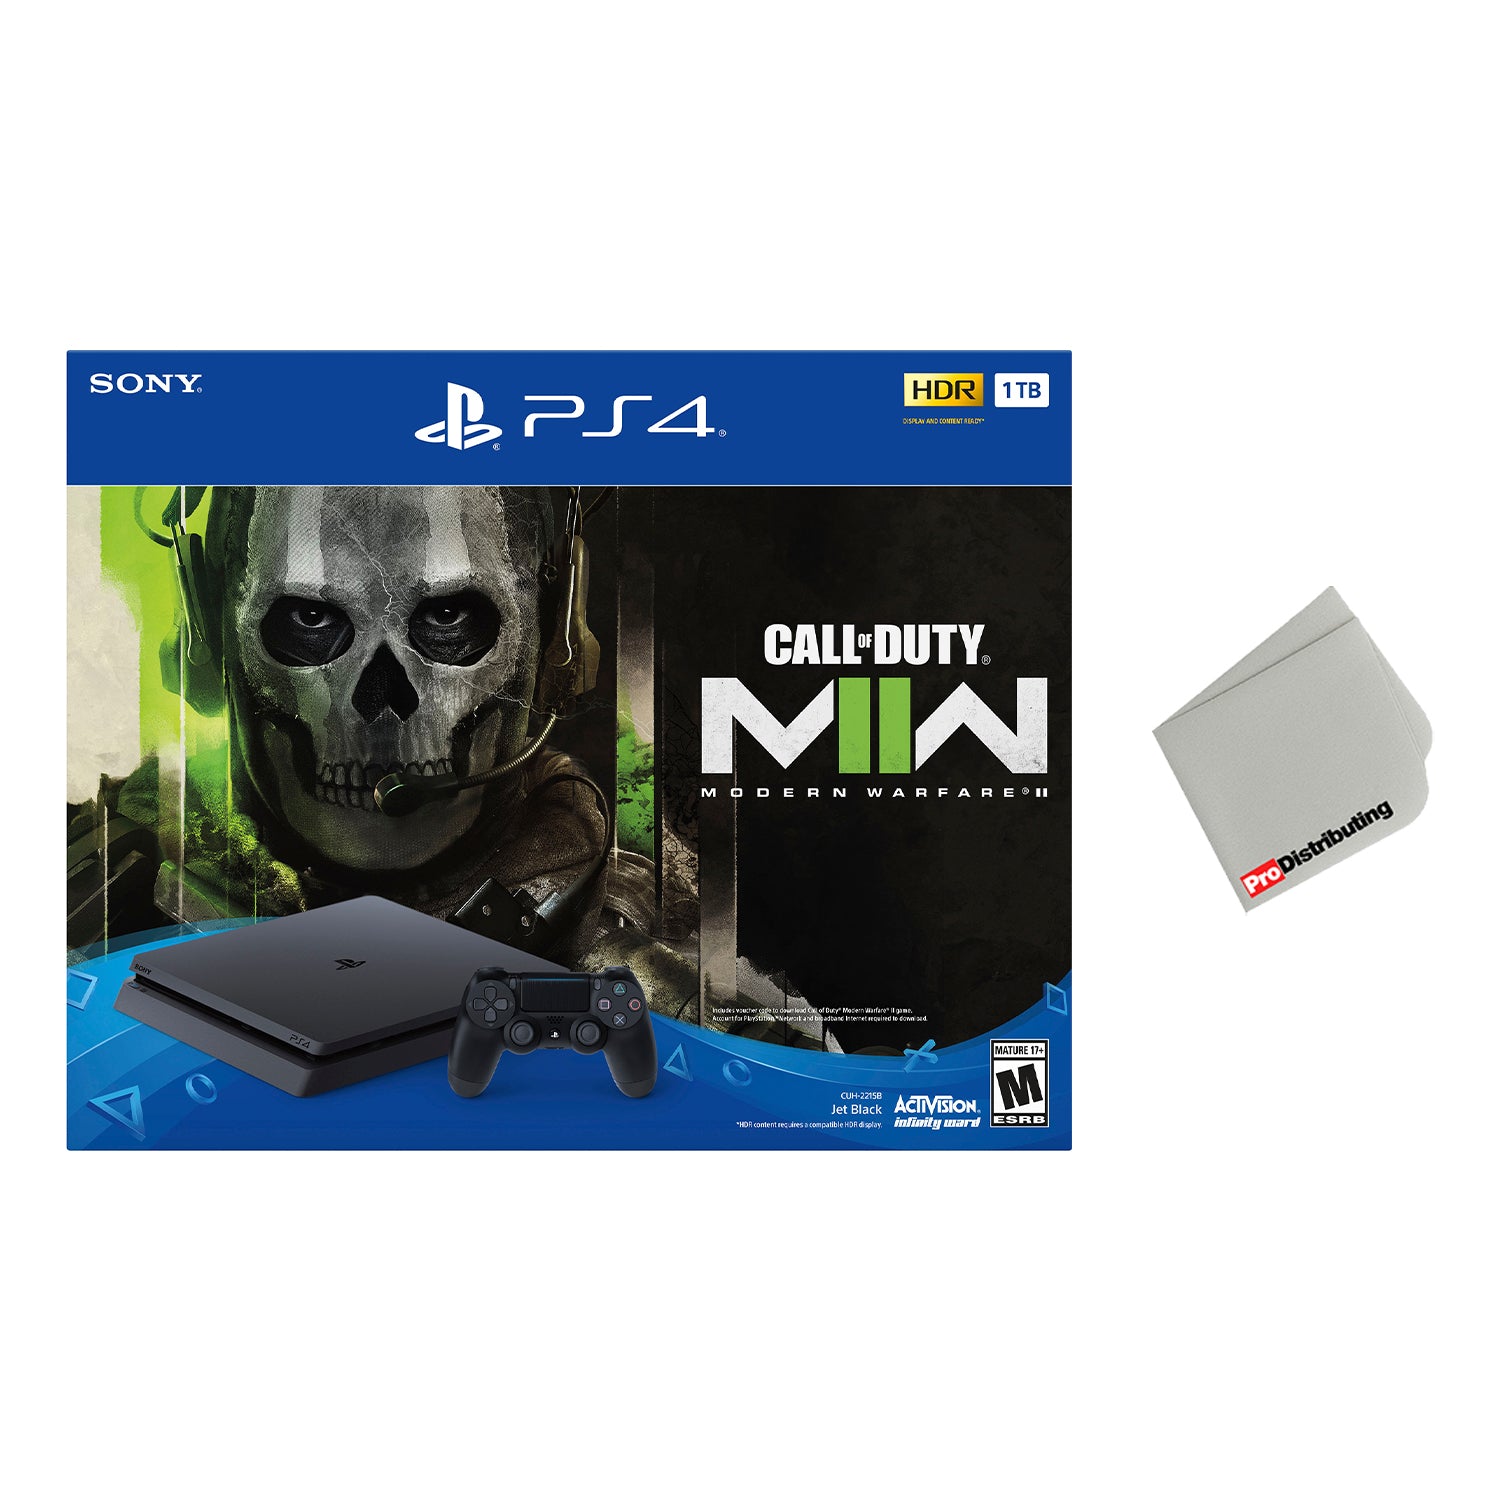 Sony PlayStation 4 Call of Duty Modern Warfare II Bundle with Microfiber Cleaning Cloth - Pro-Distributing